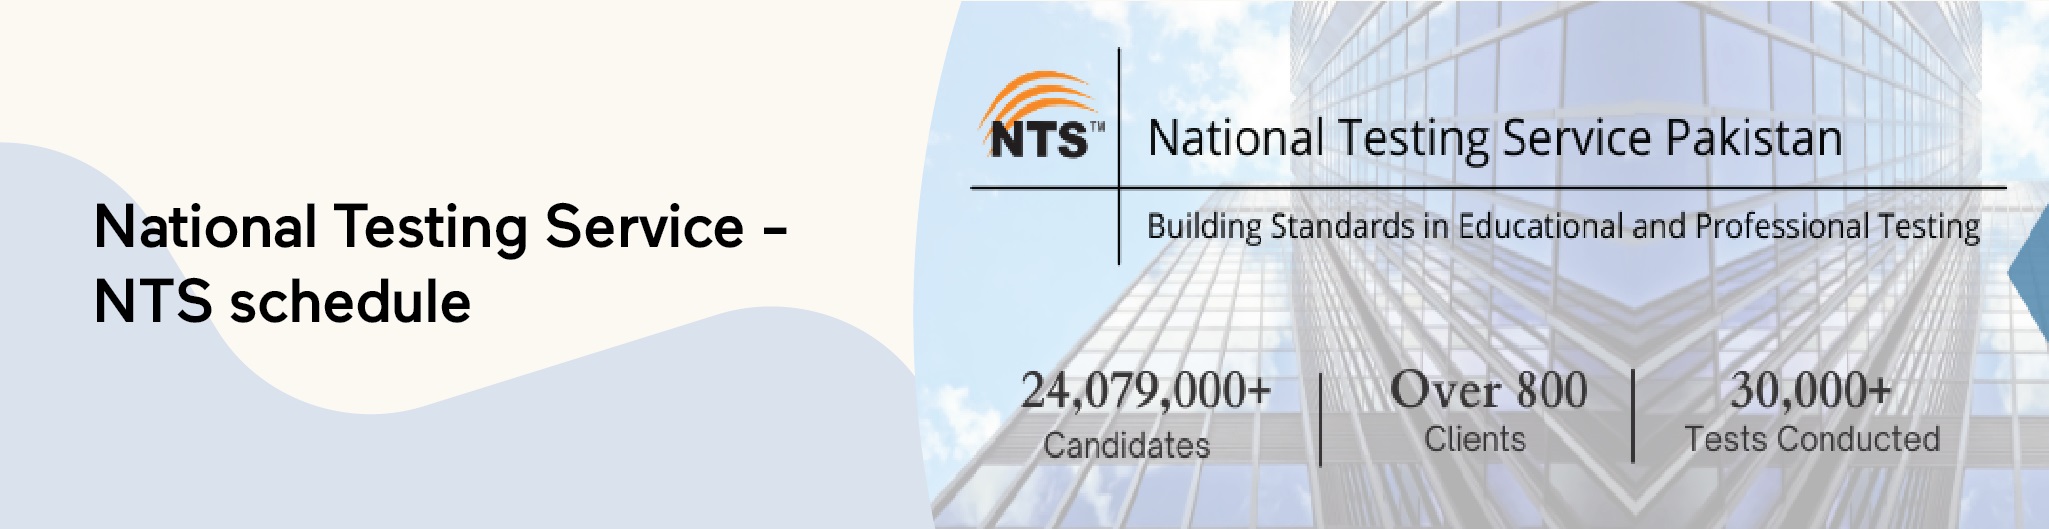 National Testing Service - NTS schedule